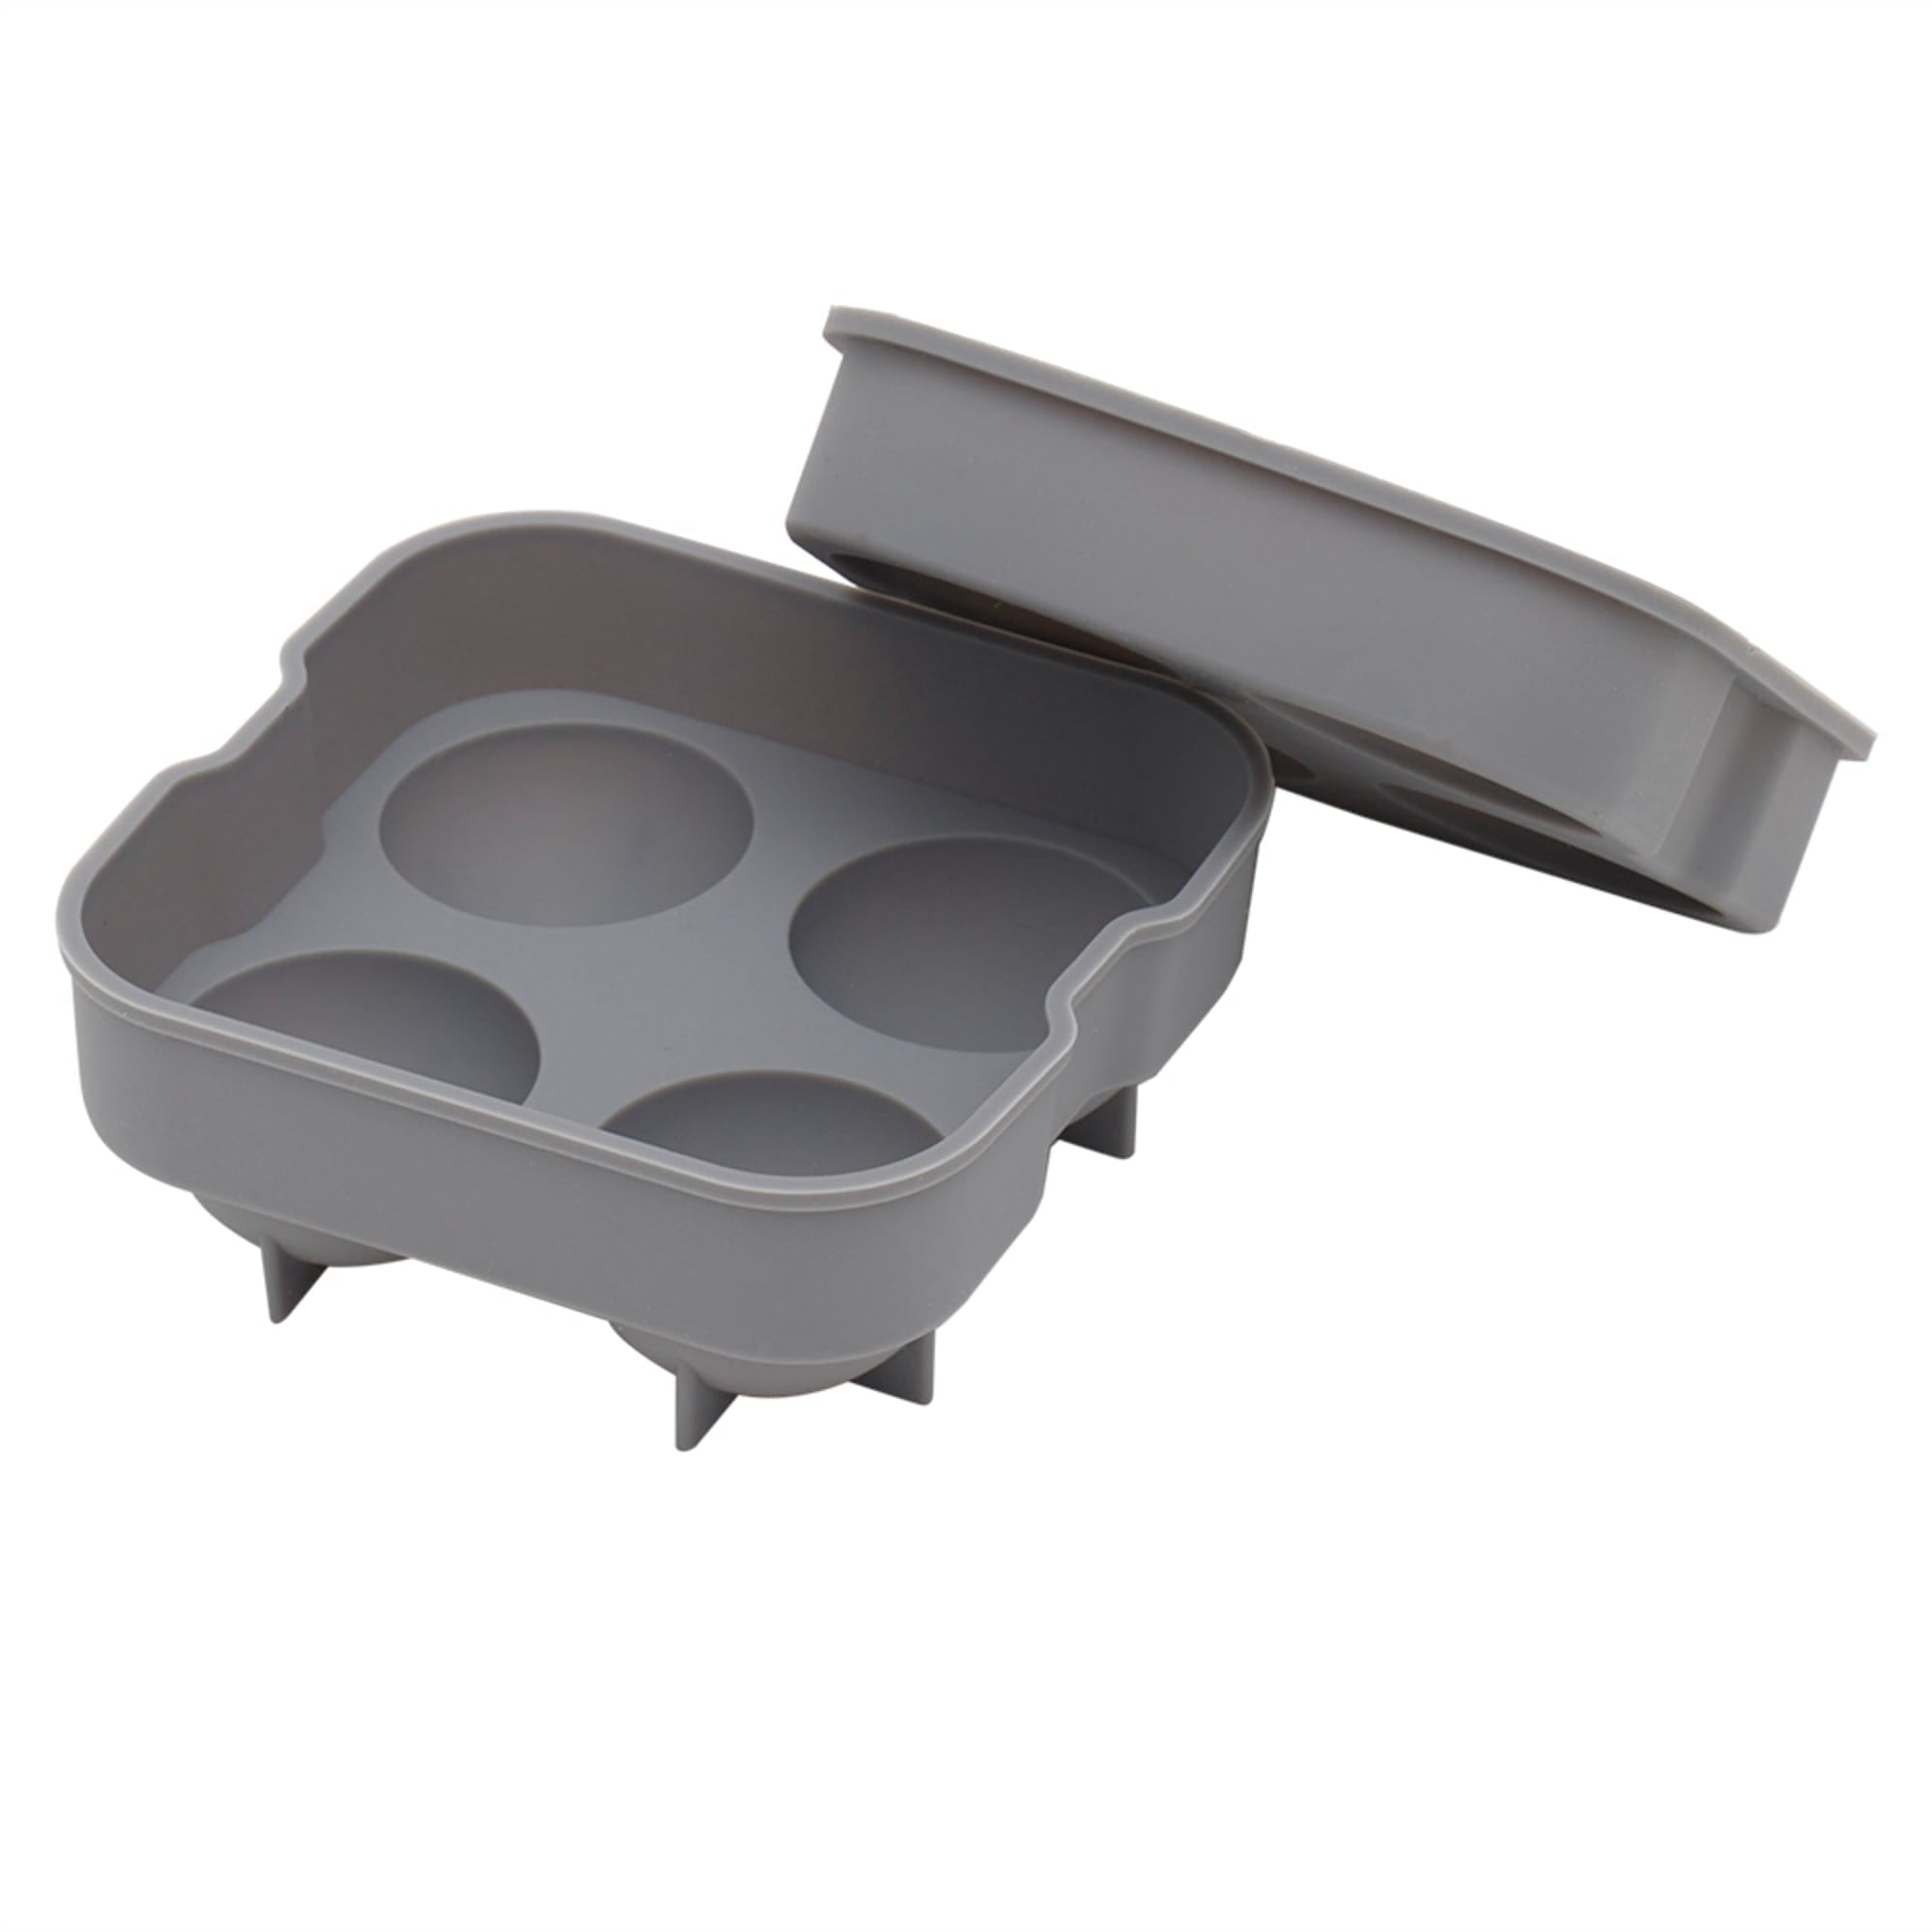 Home Basics 4 Sphere Silicone Ice Cube Mold with Lid, Grey $3.00 EACH, CASE PACK OF 24